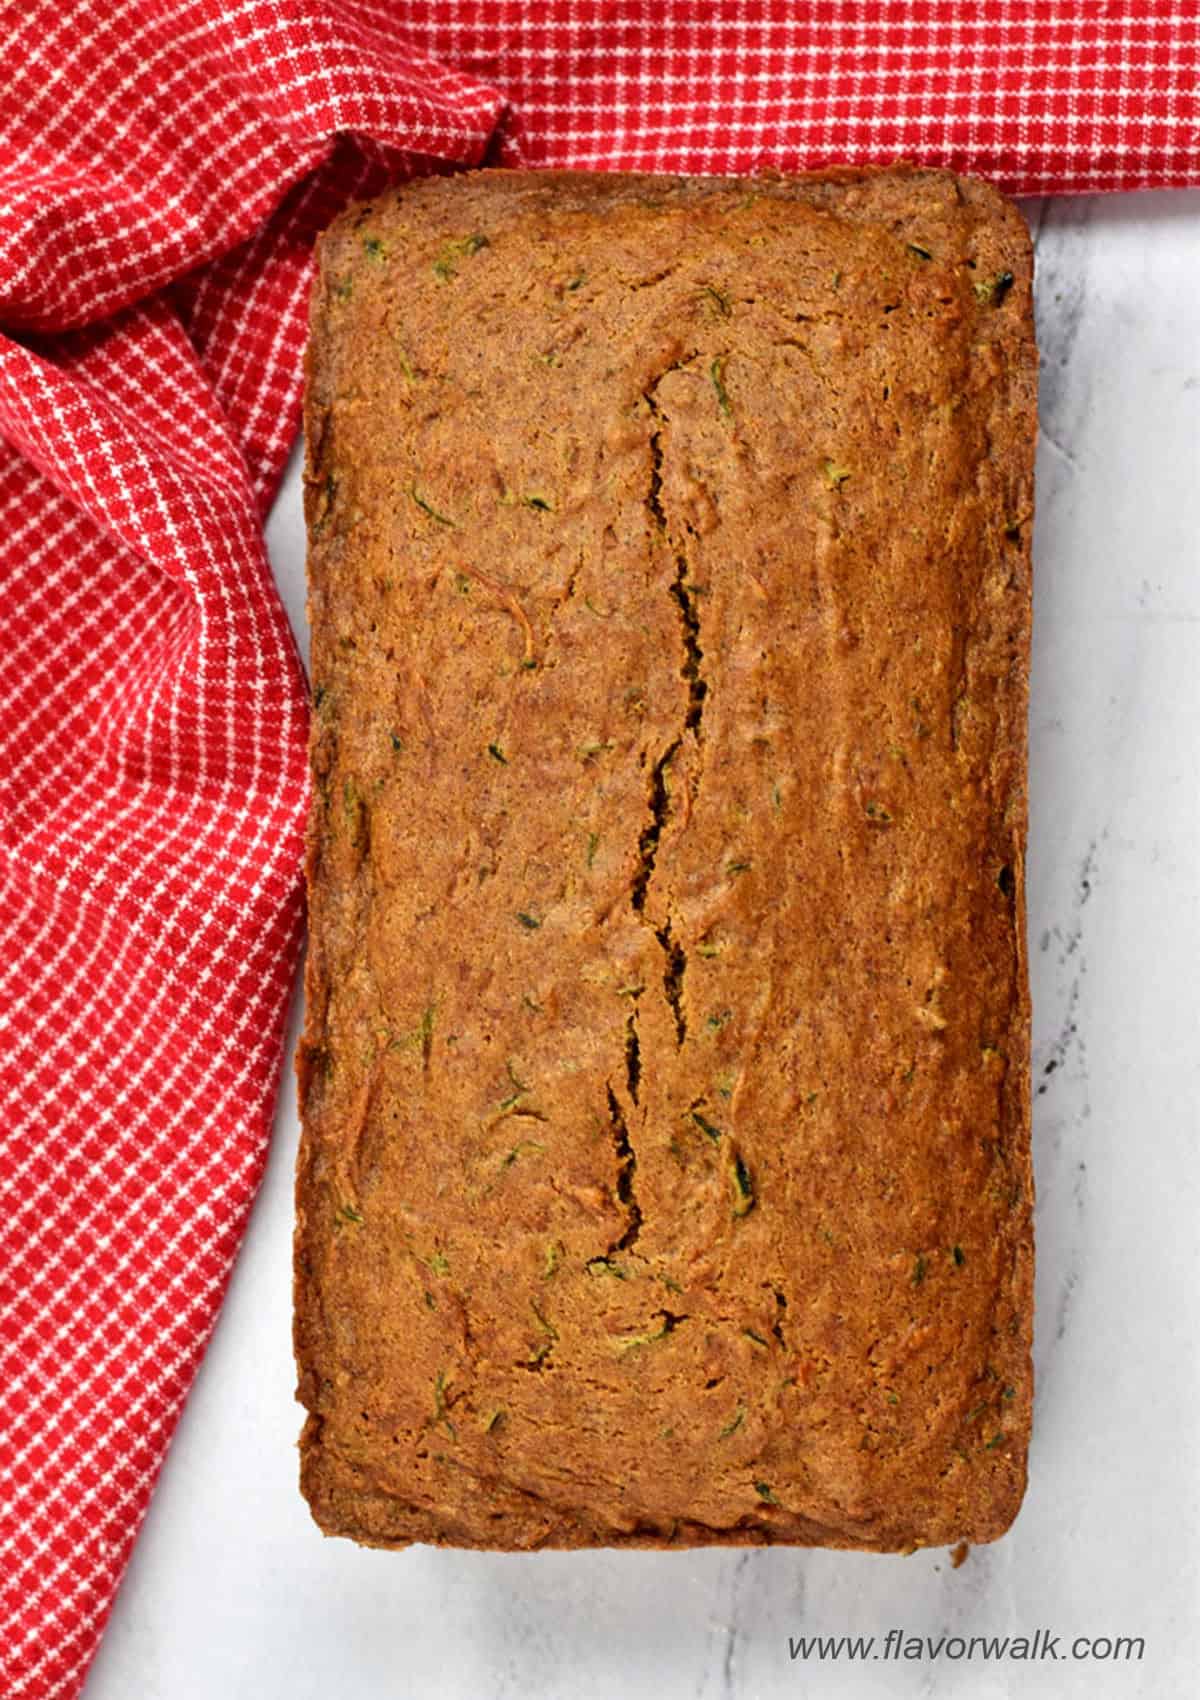 A loaf of gluten free zucchini bread and a red and white kitchen towel on the counter.